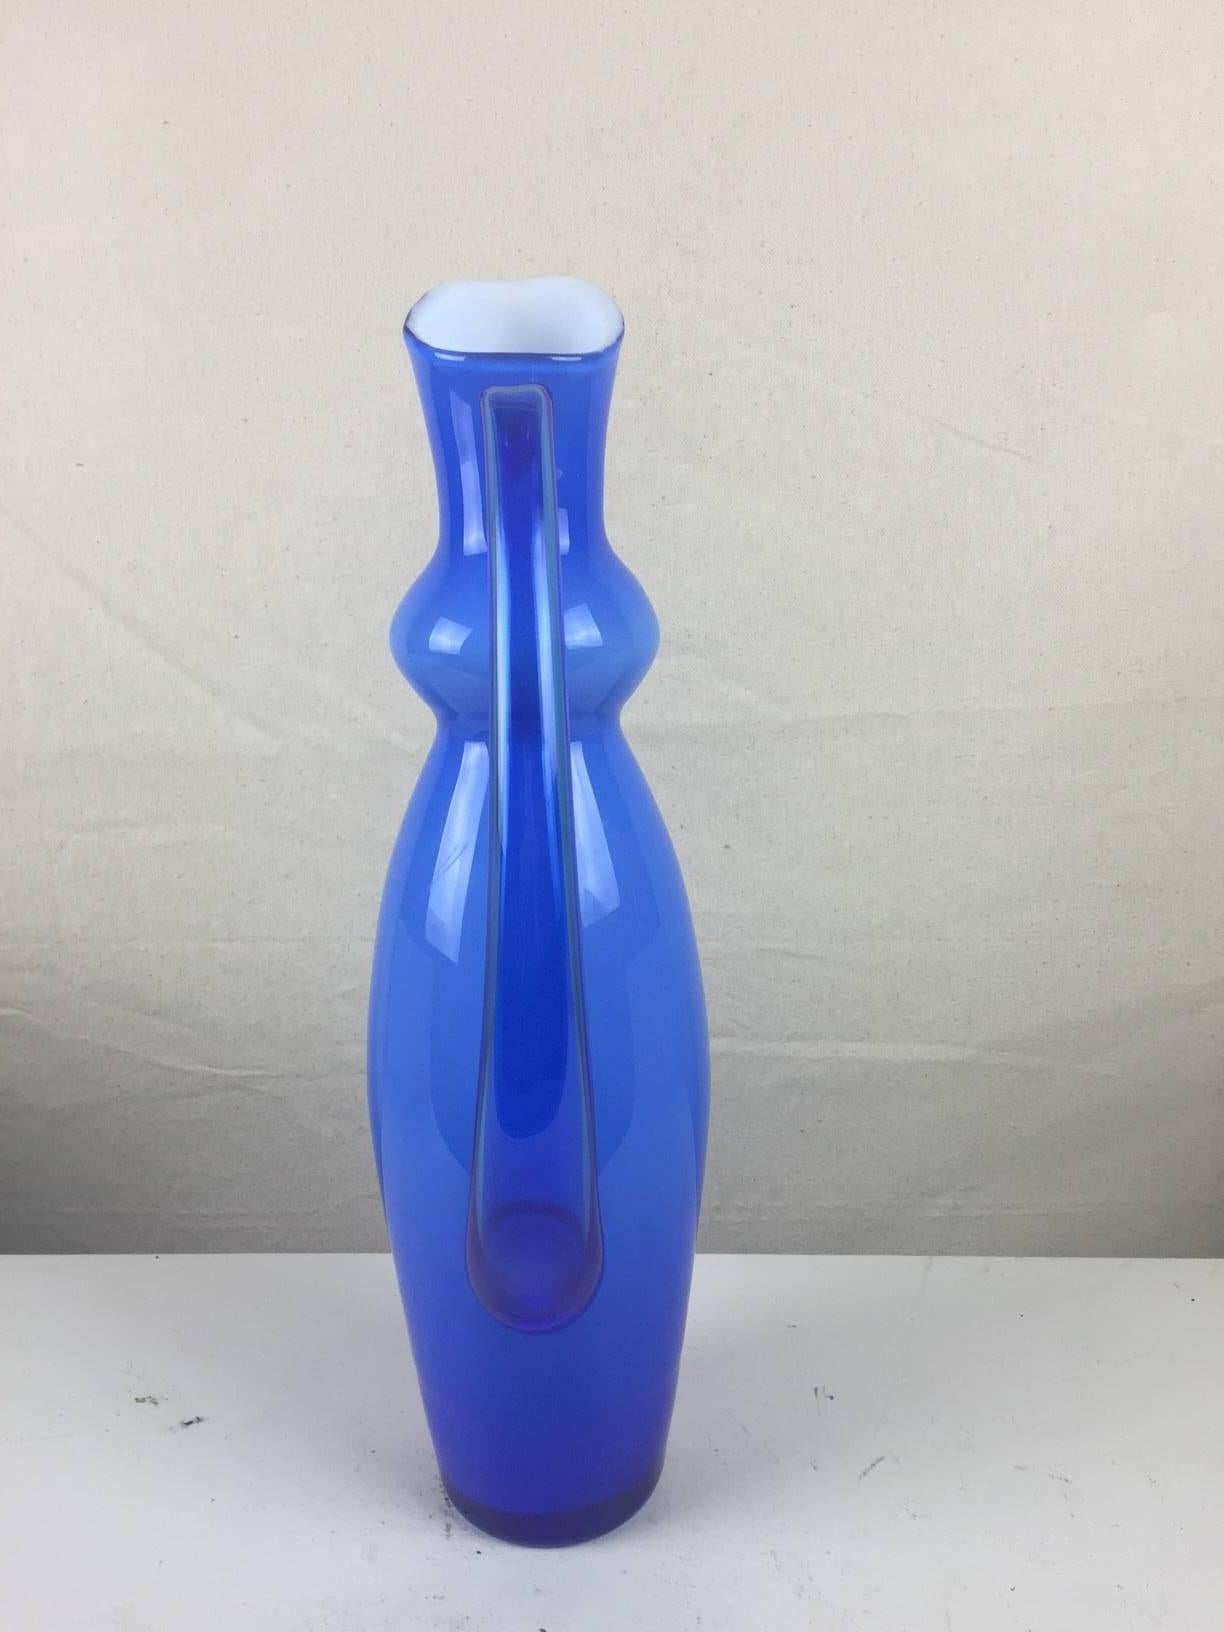 This graceful glass piece has a white glass interior and a brilliant periwinkle exterior and has stunning lines. It can serve as a pitcher or a vase. By Orrefors of Sweden. Signed on bottom. Width including handle is 6.5.